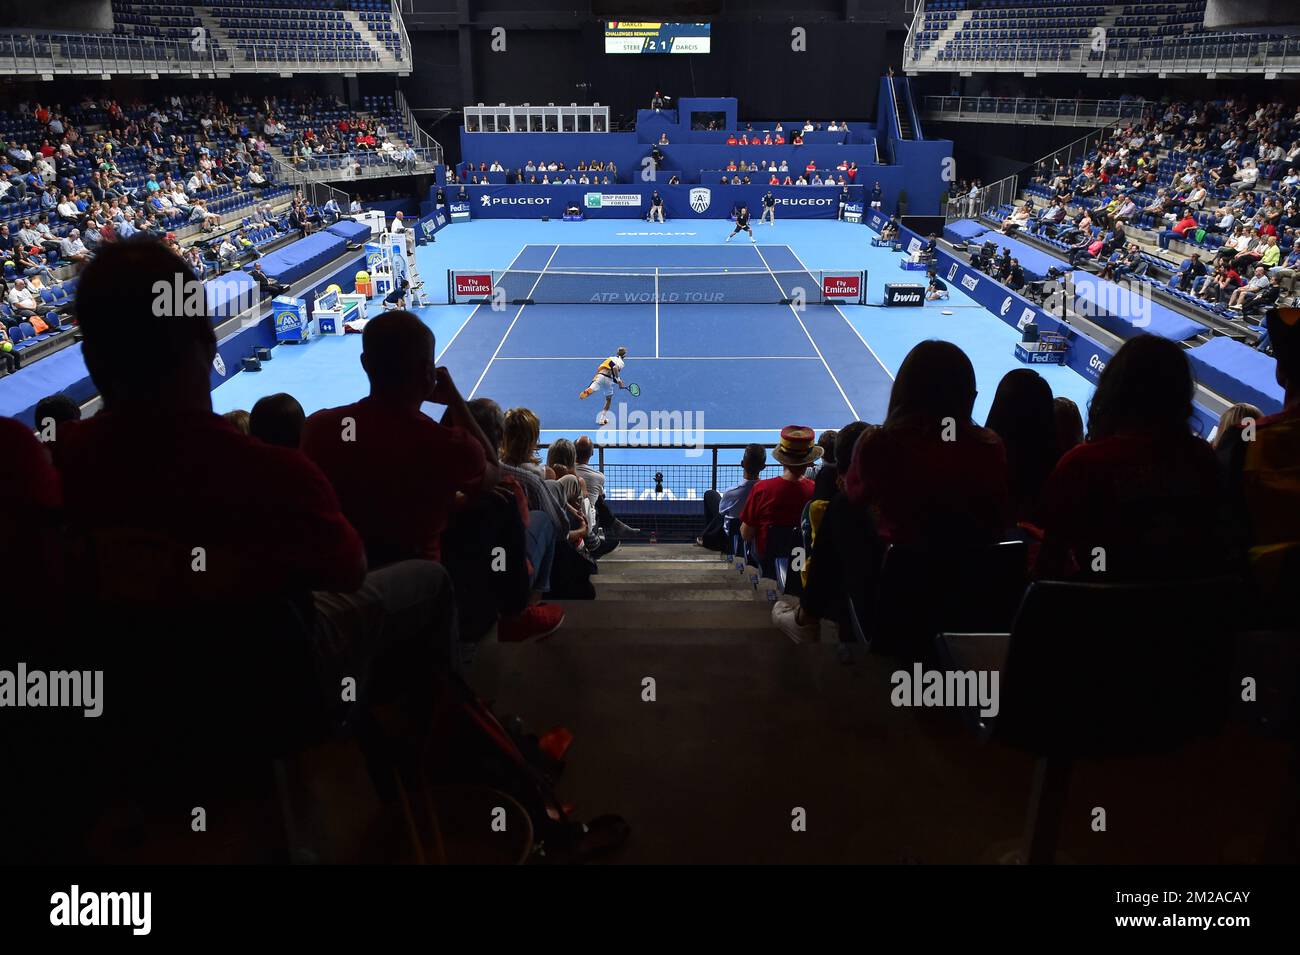 Illustration picture taken during a 1/8 finals game between Belgian Steve Darcis (ATP 65) and German Cedrik-Marcel Stebe (ATP 80) on the third day of the ATP Antwerp tennis tournement on hard court, Wednesday 18 October 2017, in Antwerp. BELGA PHOTO LUC CLAESSEN Stock Photo